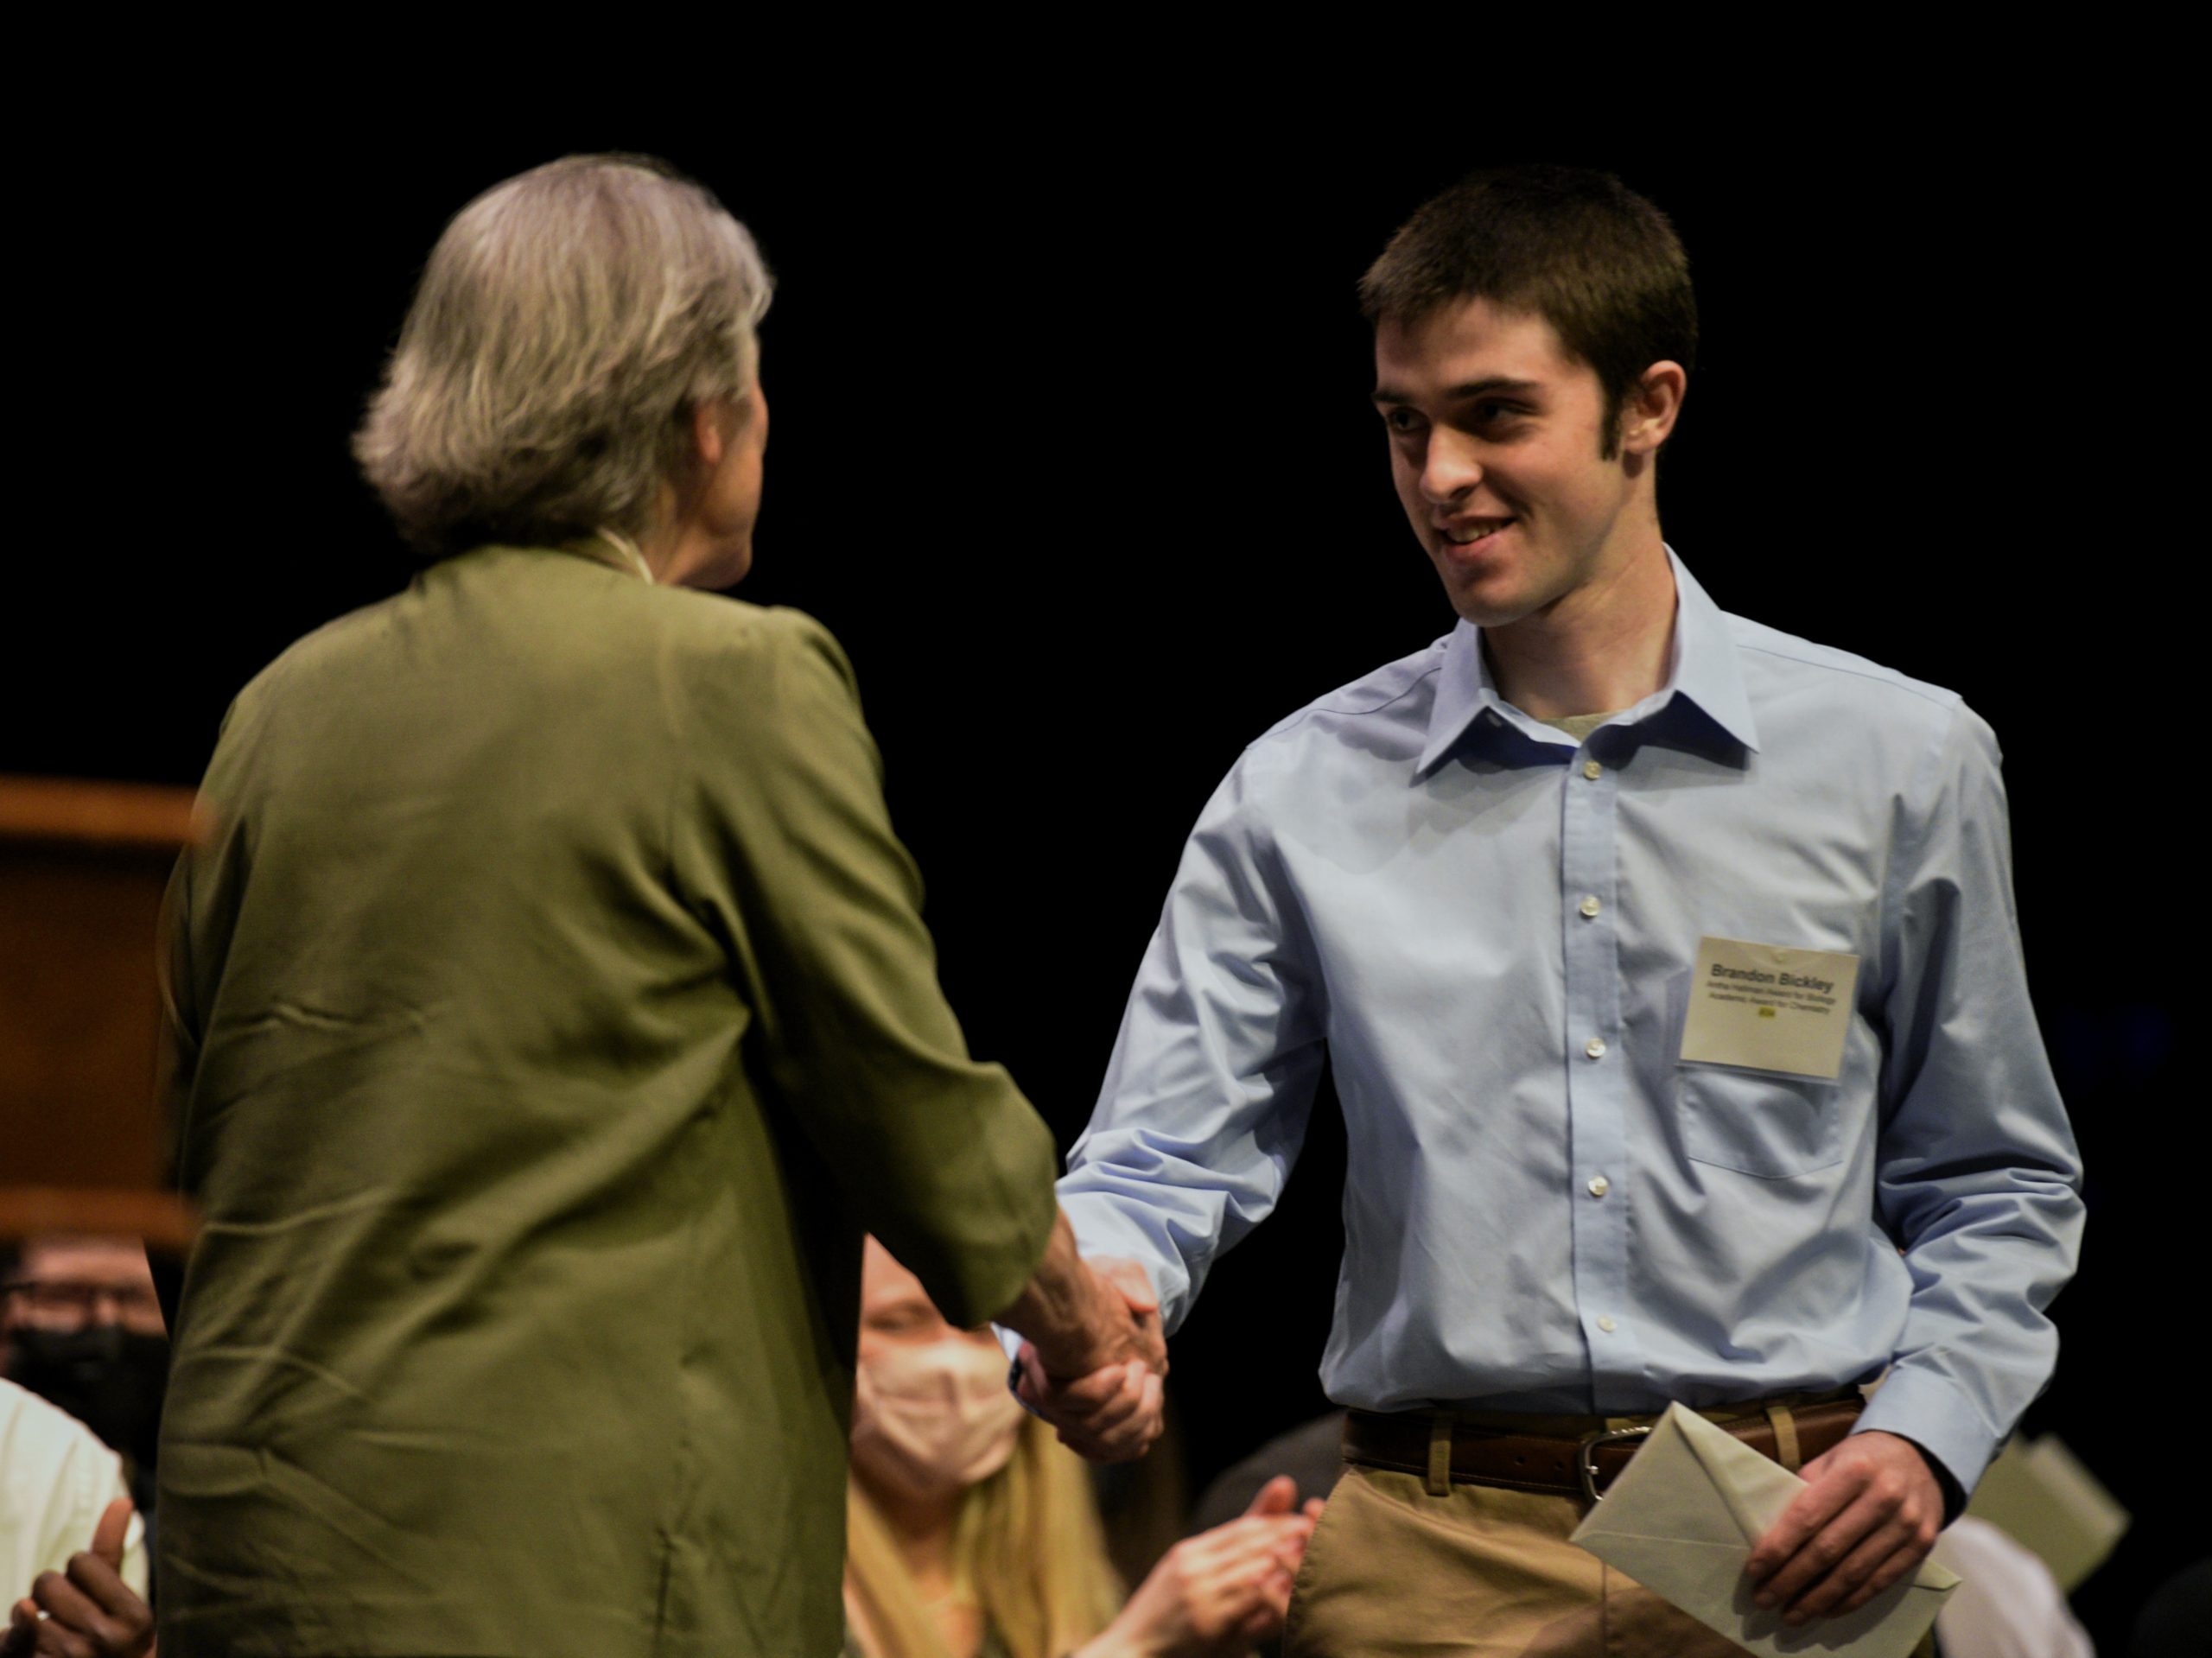 Brandon Bickley receives the Chemistry award from Frances Rees